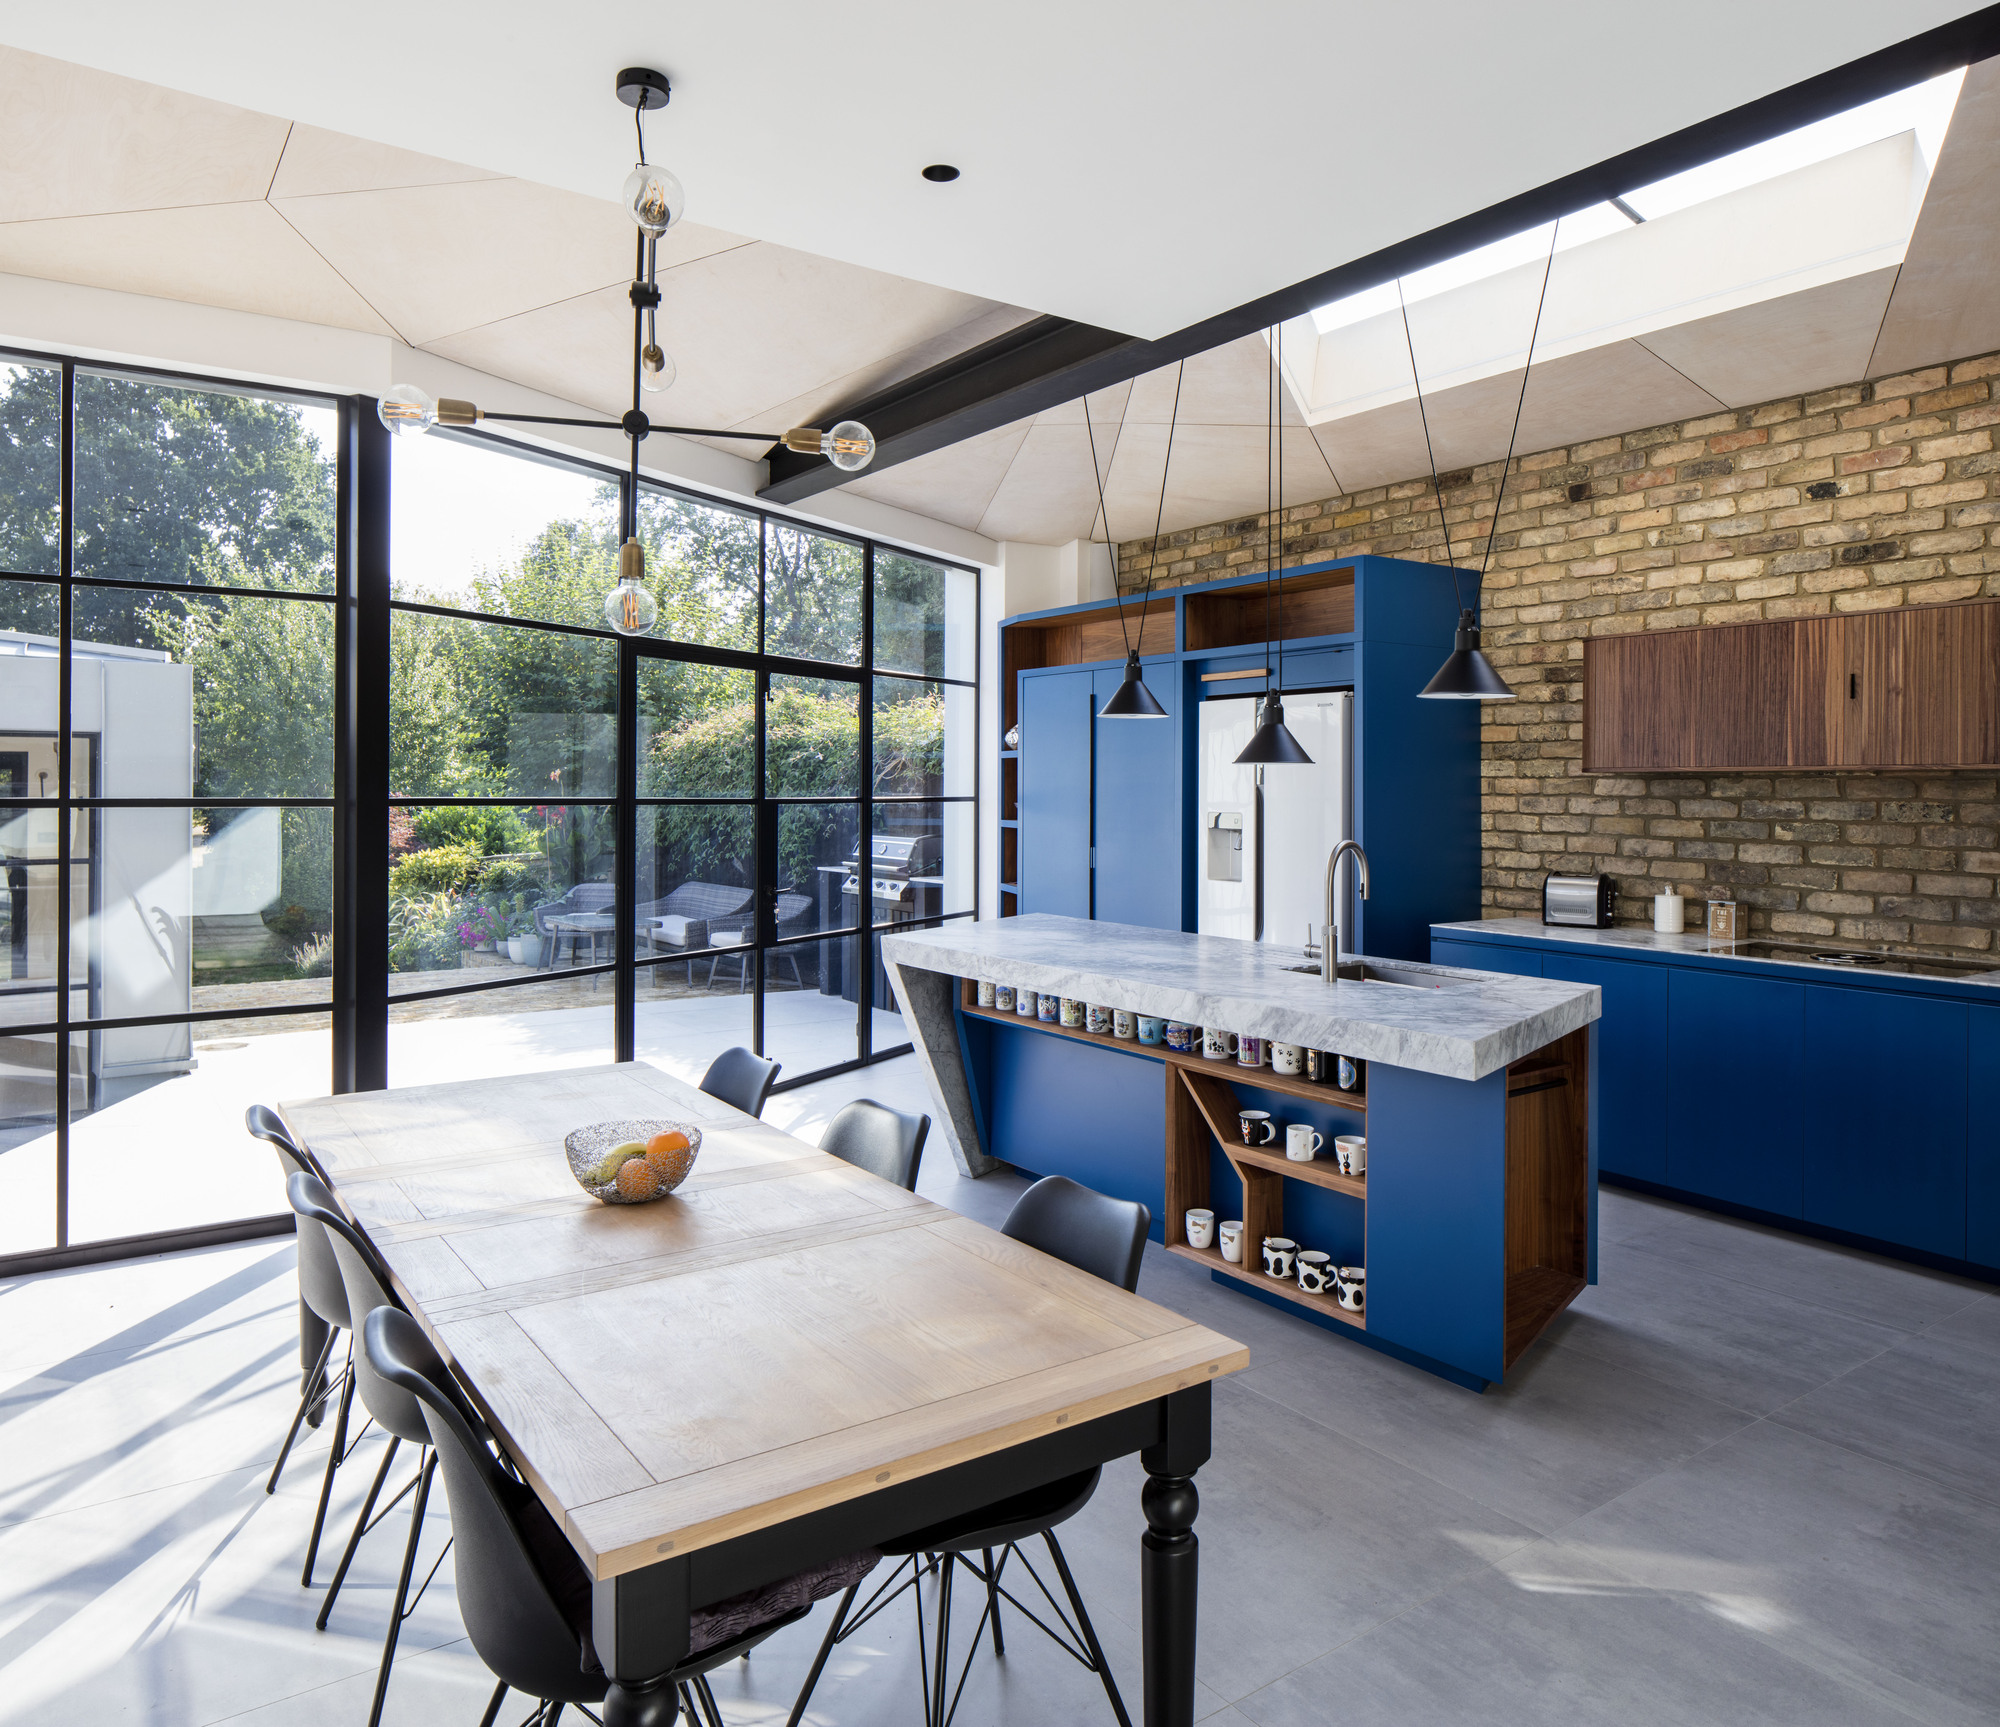 Renovated-Victorian-home-dining-area-and-kitchen-with-exposed-brick-wall-and-blue-cabinets-75480